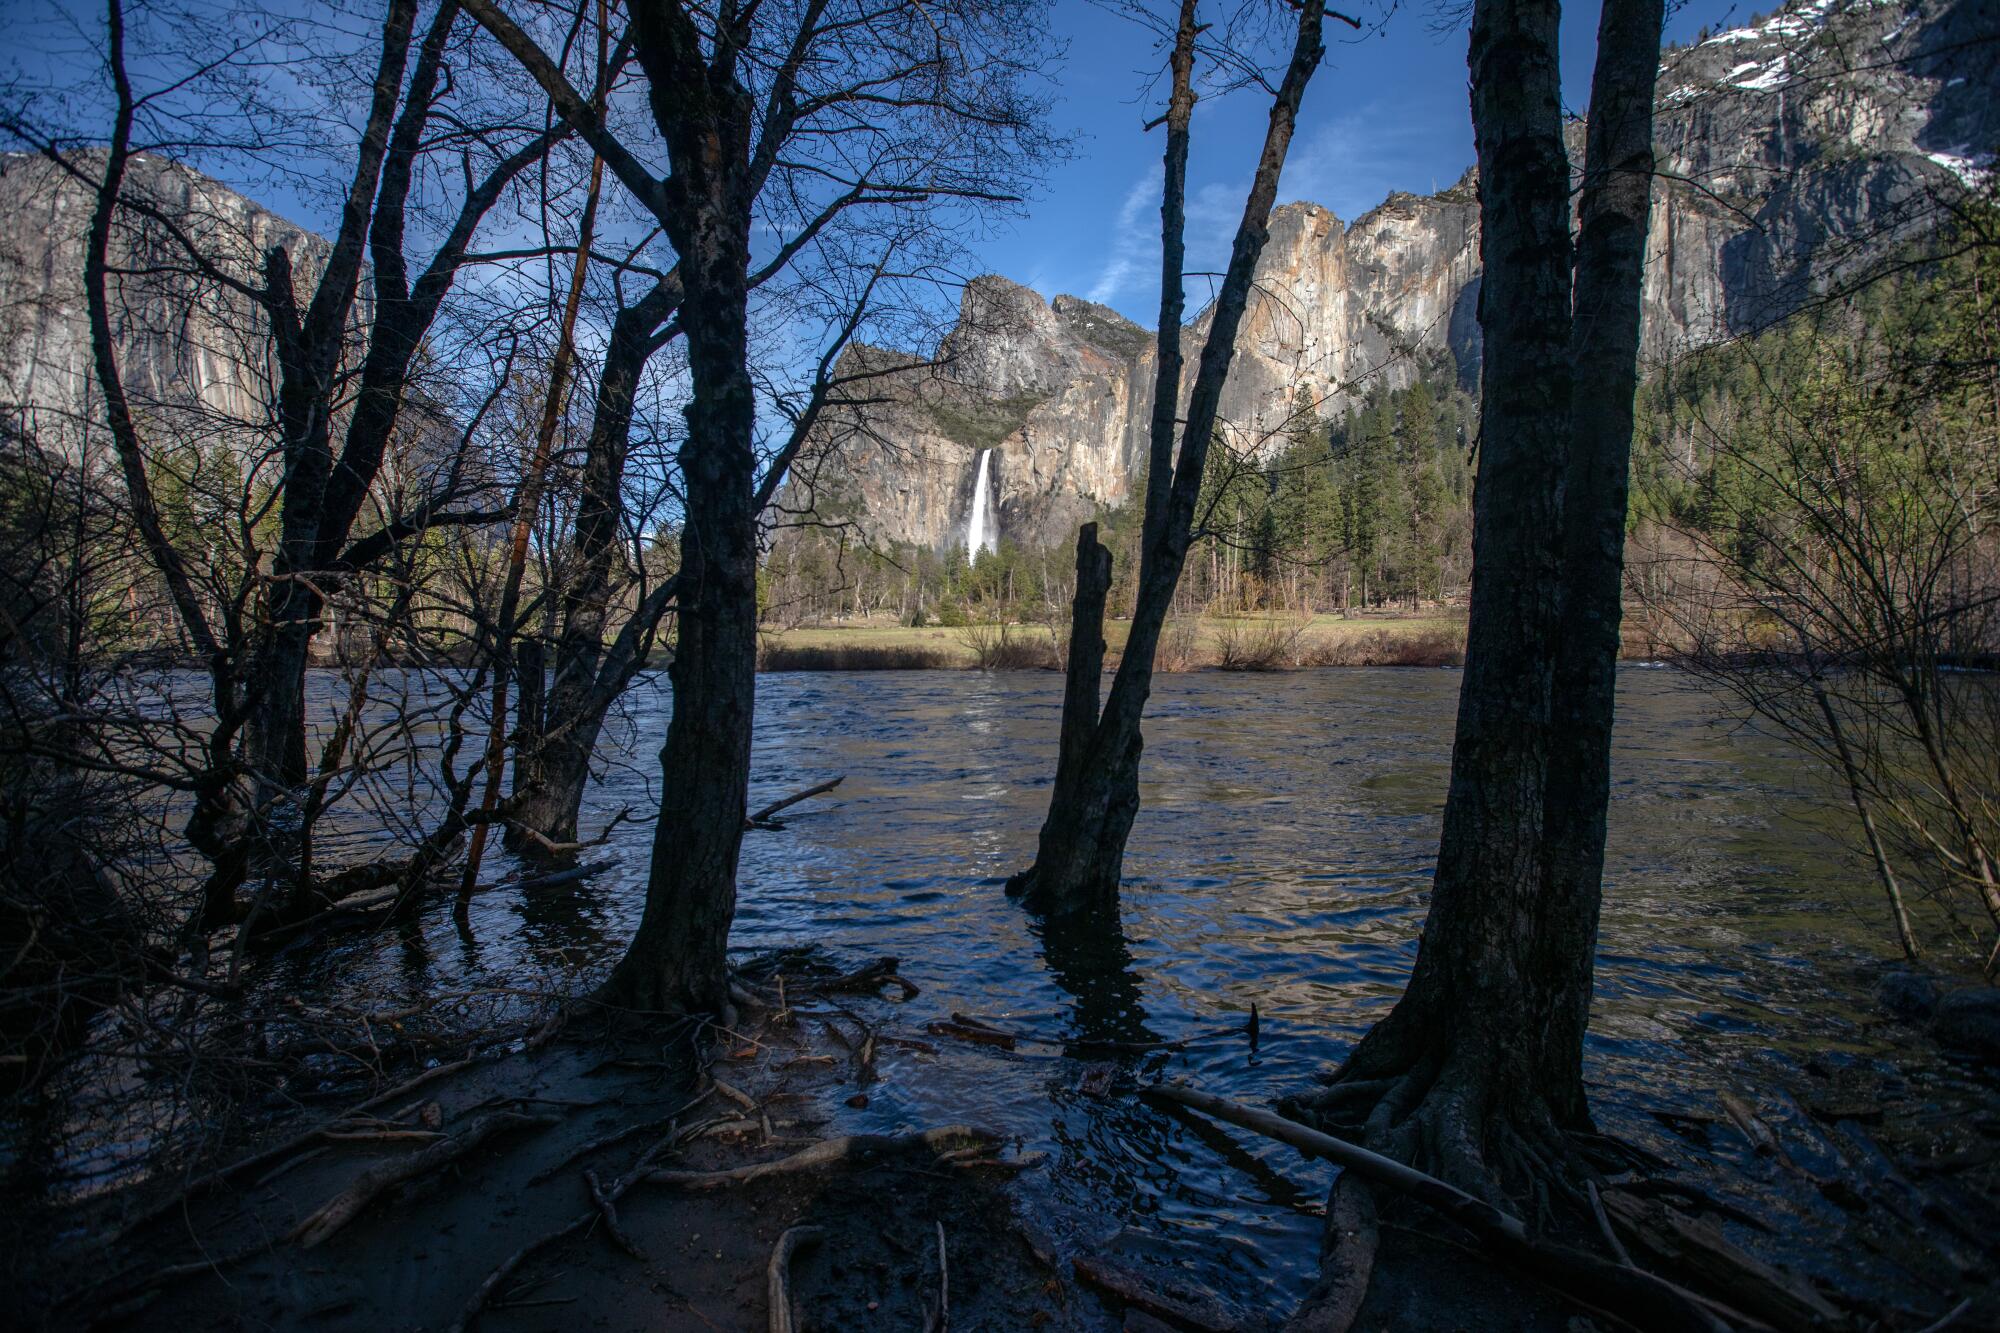 The Merced River rises around trees in Yosemite National Park